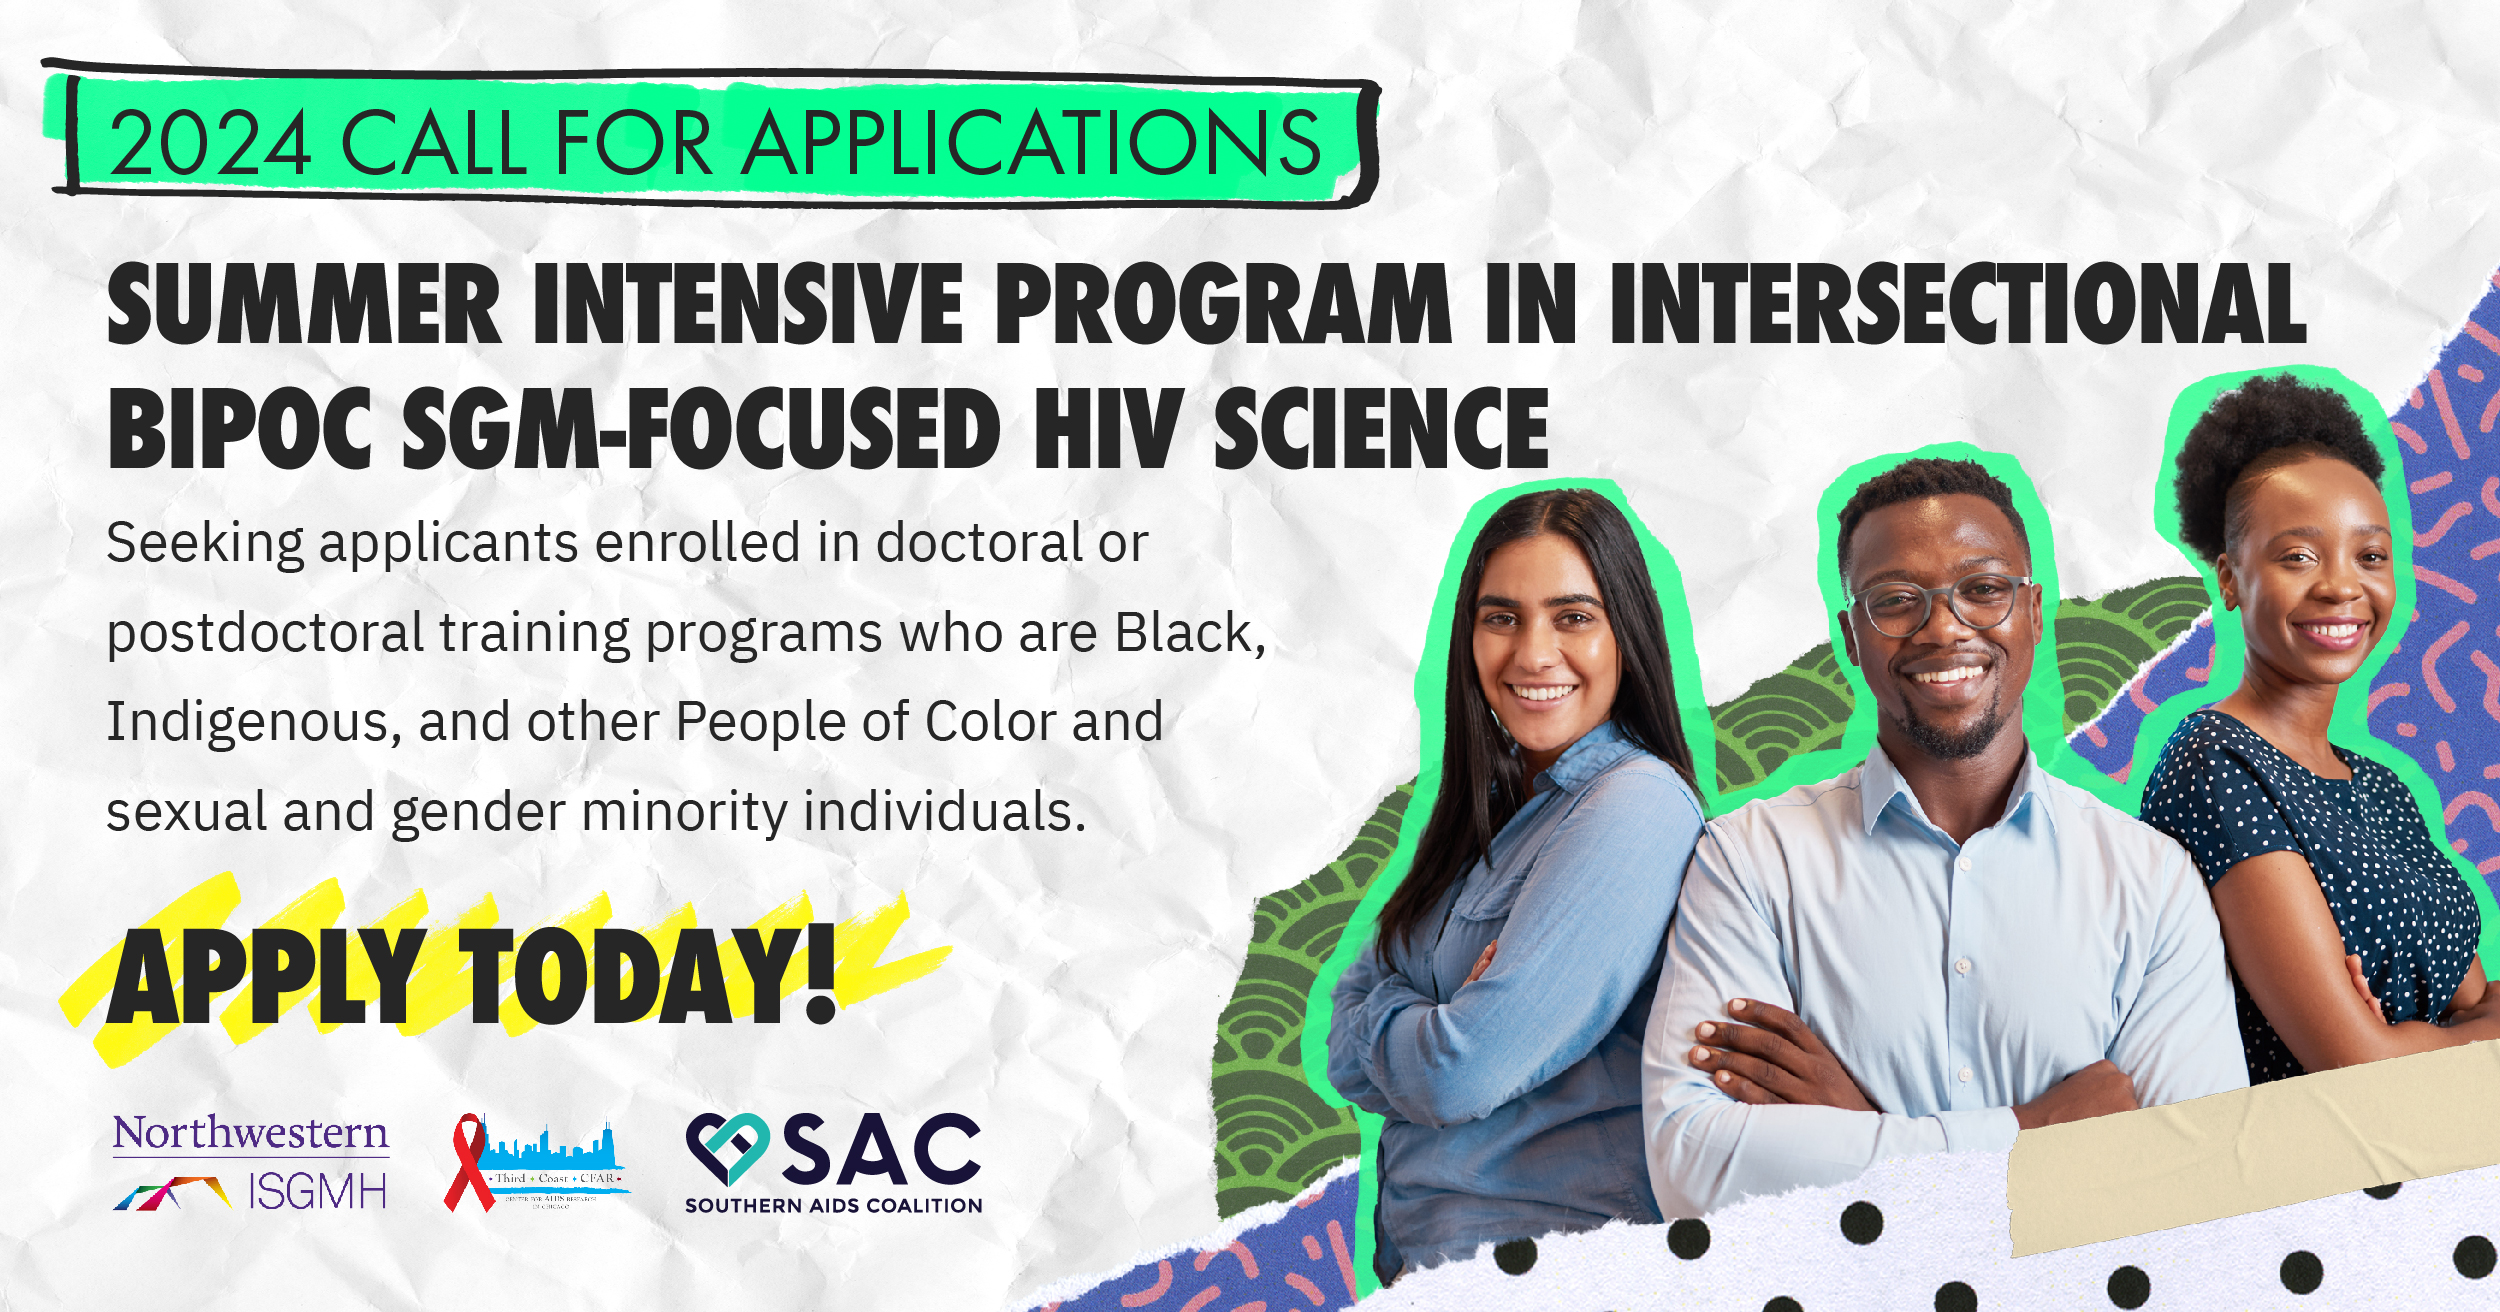 2024 Call for Applications. SUMMER INTENSIVE PROGRAM IN INTERSECTIONAL BIPOC SGM-FOCUSED HIV SCIENCE. Seeking applicants enrolled in doctoral or postdoctoral training programs who are Black, Indigenous, and other People of Color and sexual and gender minority individuals. Apply today! Northwestern ISGMH, Third Coast CFAR, Southern AIDS Coalition.